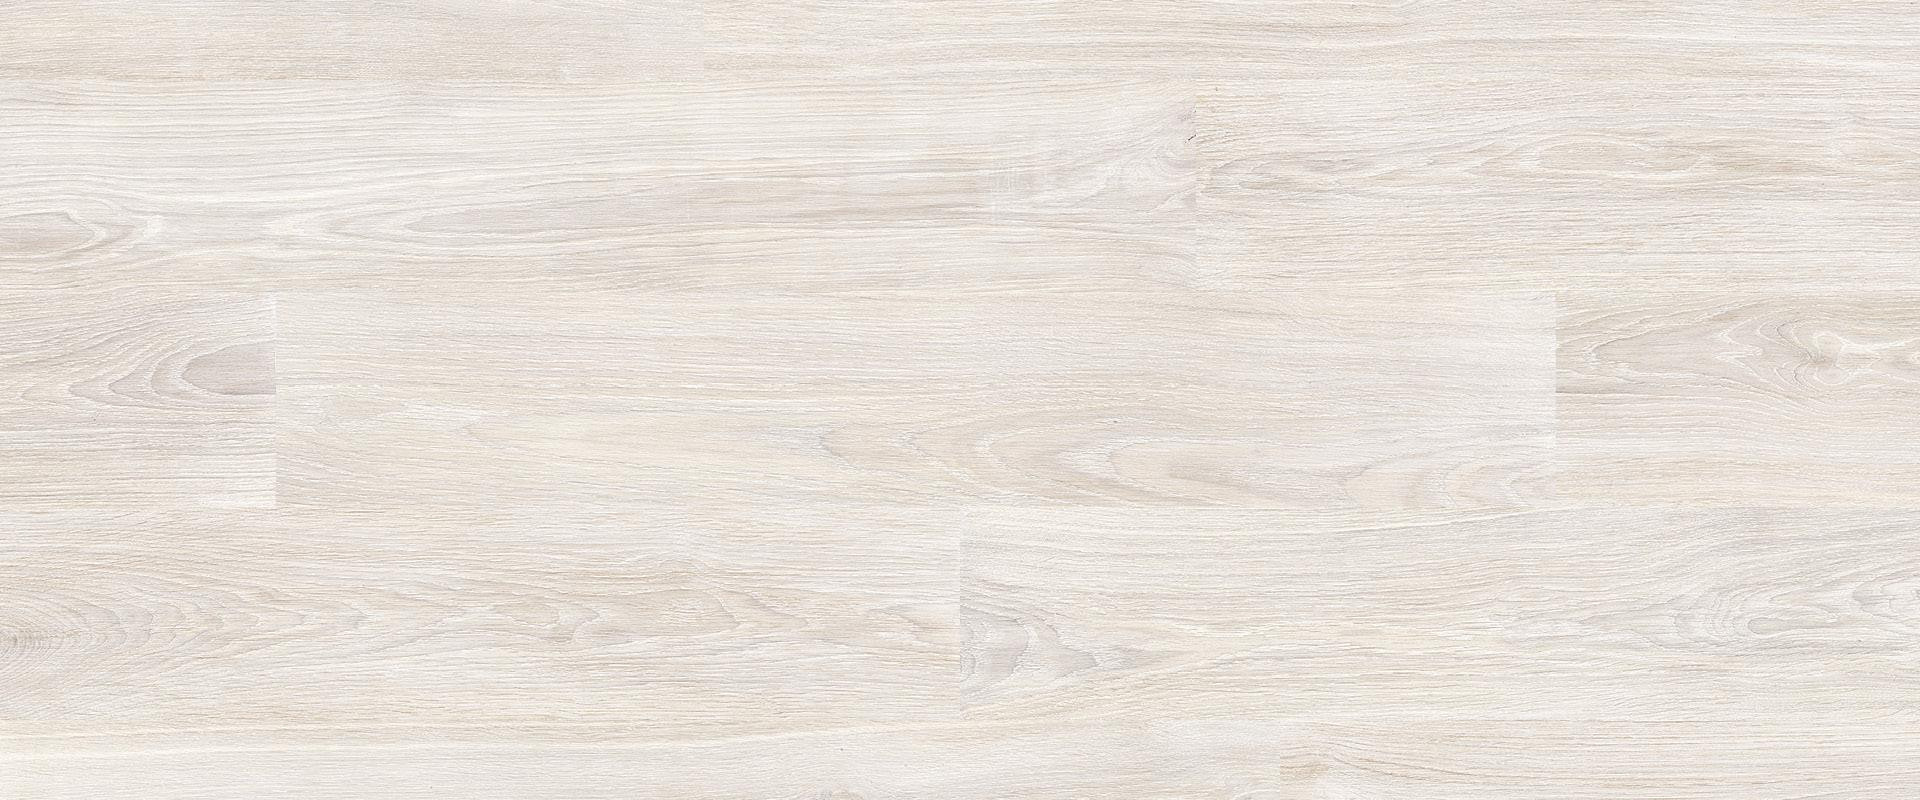 Woodtouch R11 Series Bleached Porcelain Tile Floor and Wall by Ergon Ceramica
